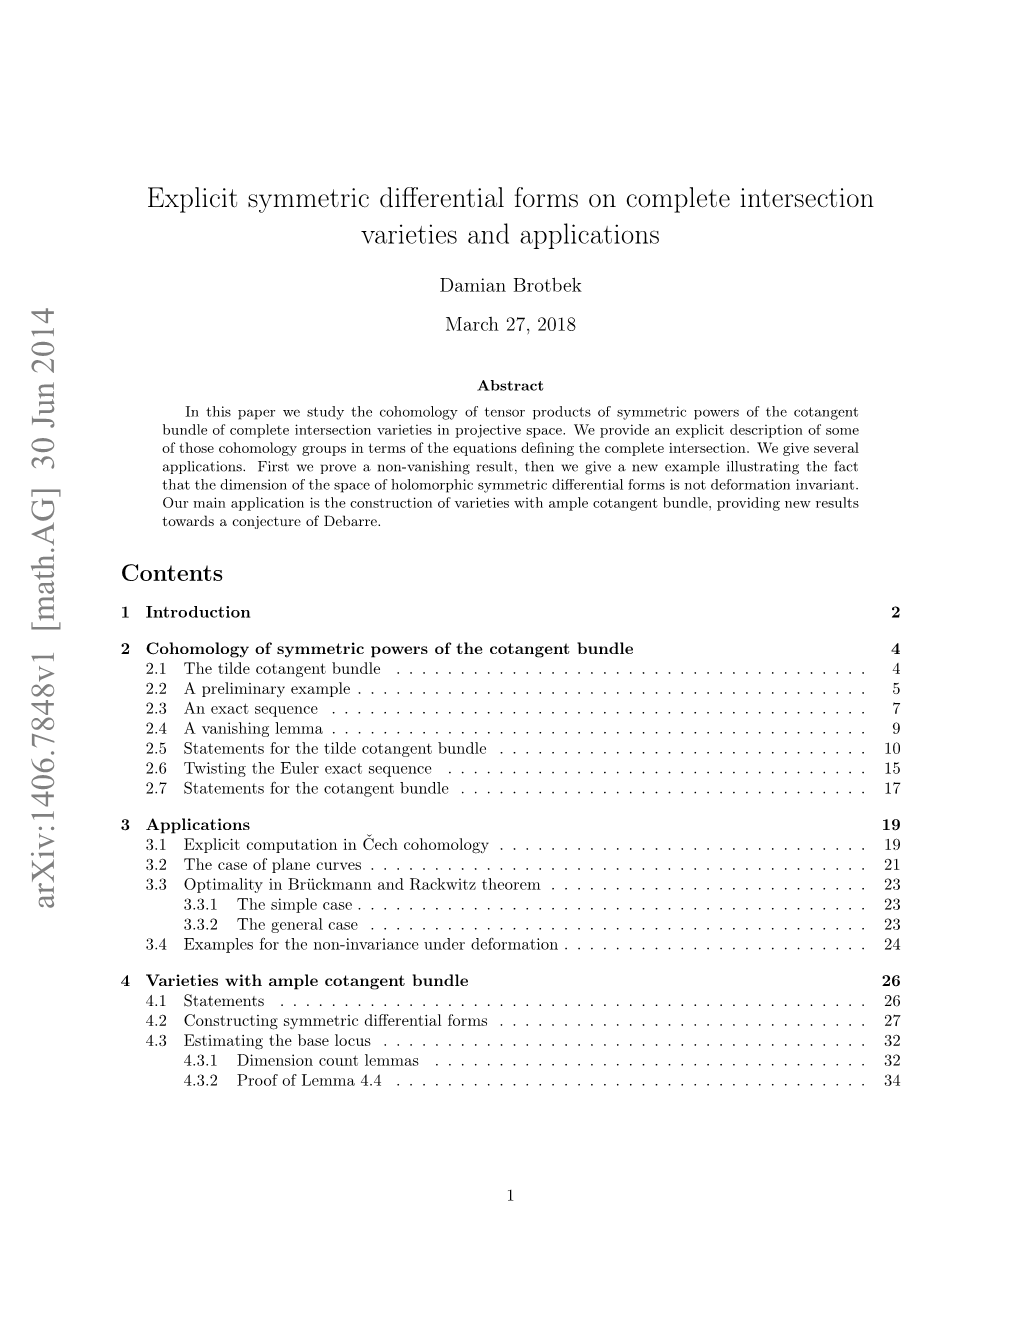 Explicit Symmetric Differential Forms on Complete Intersection Varieties And